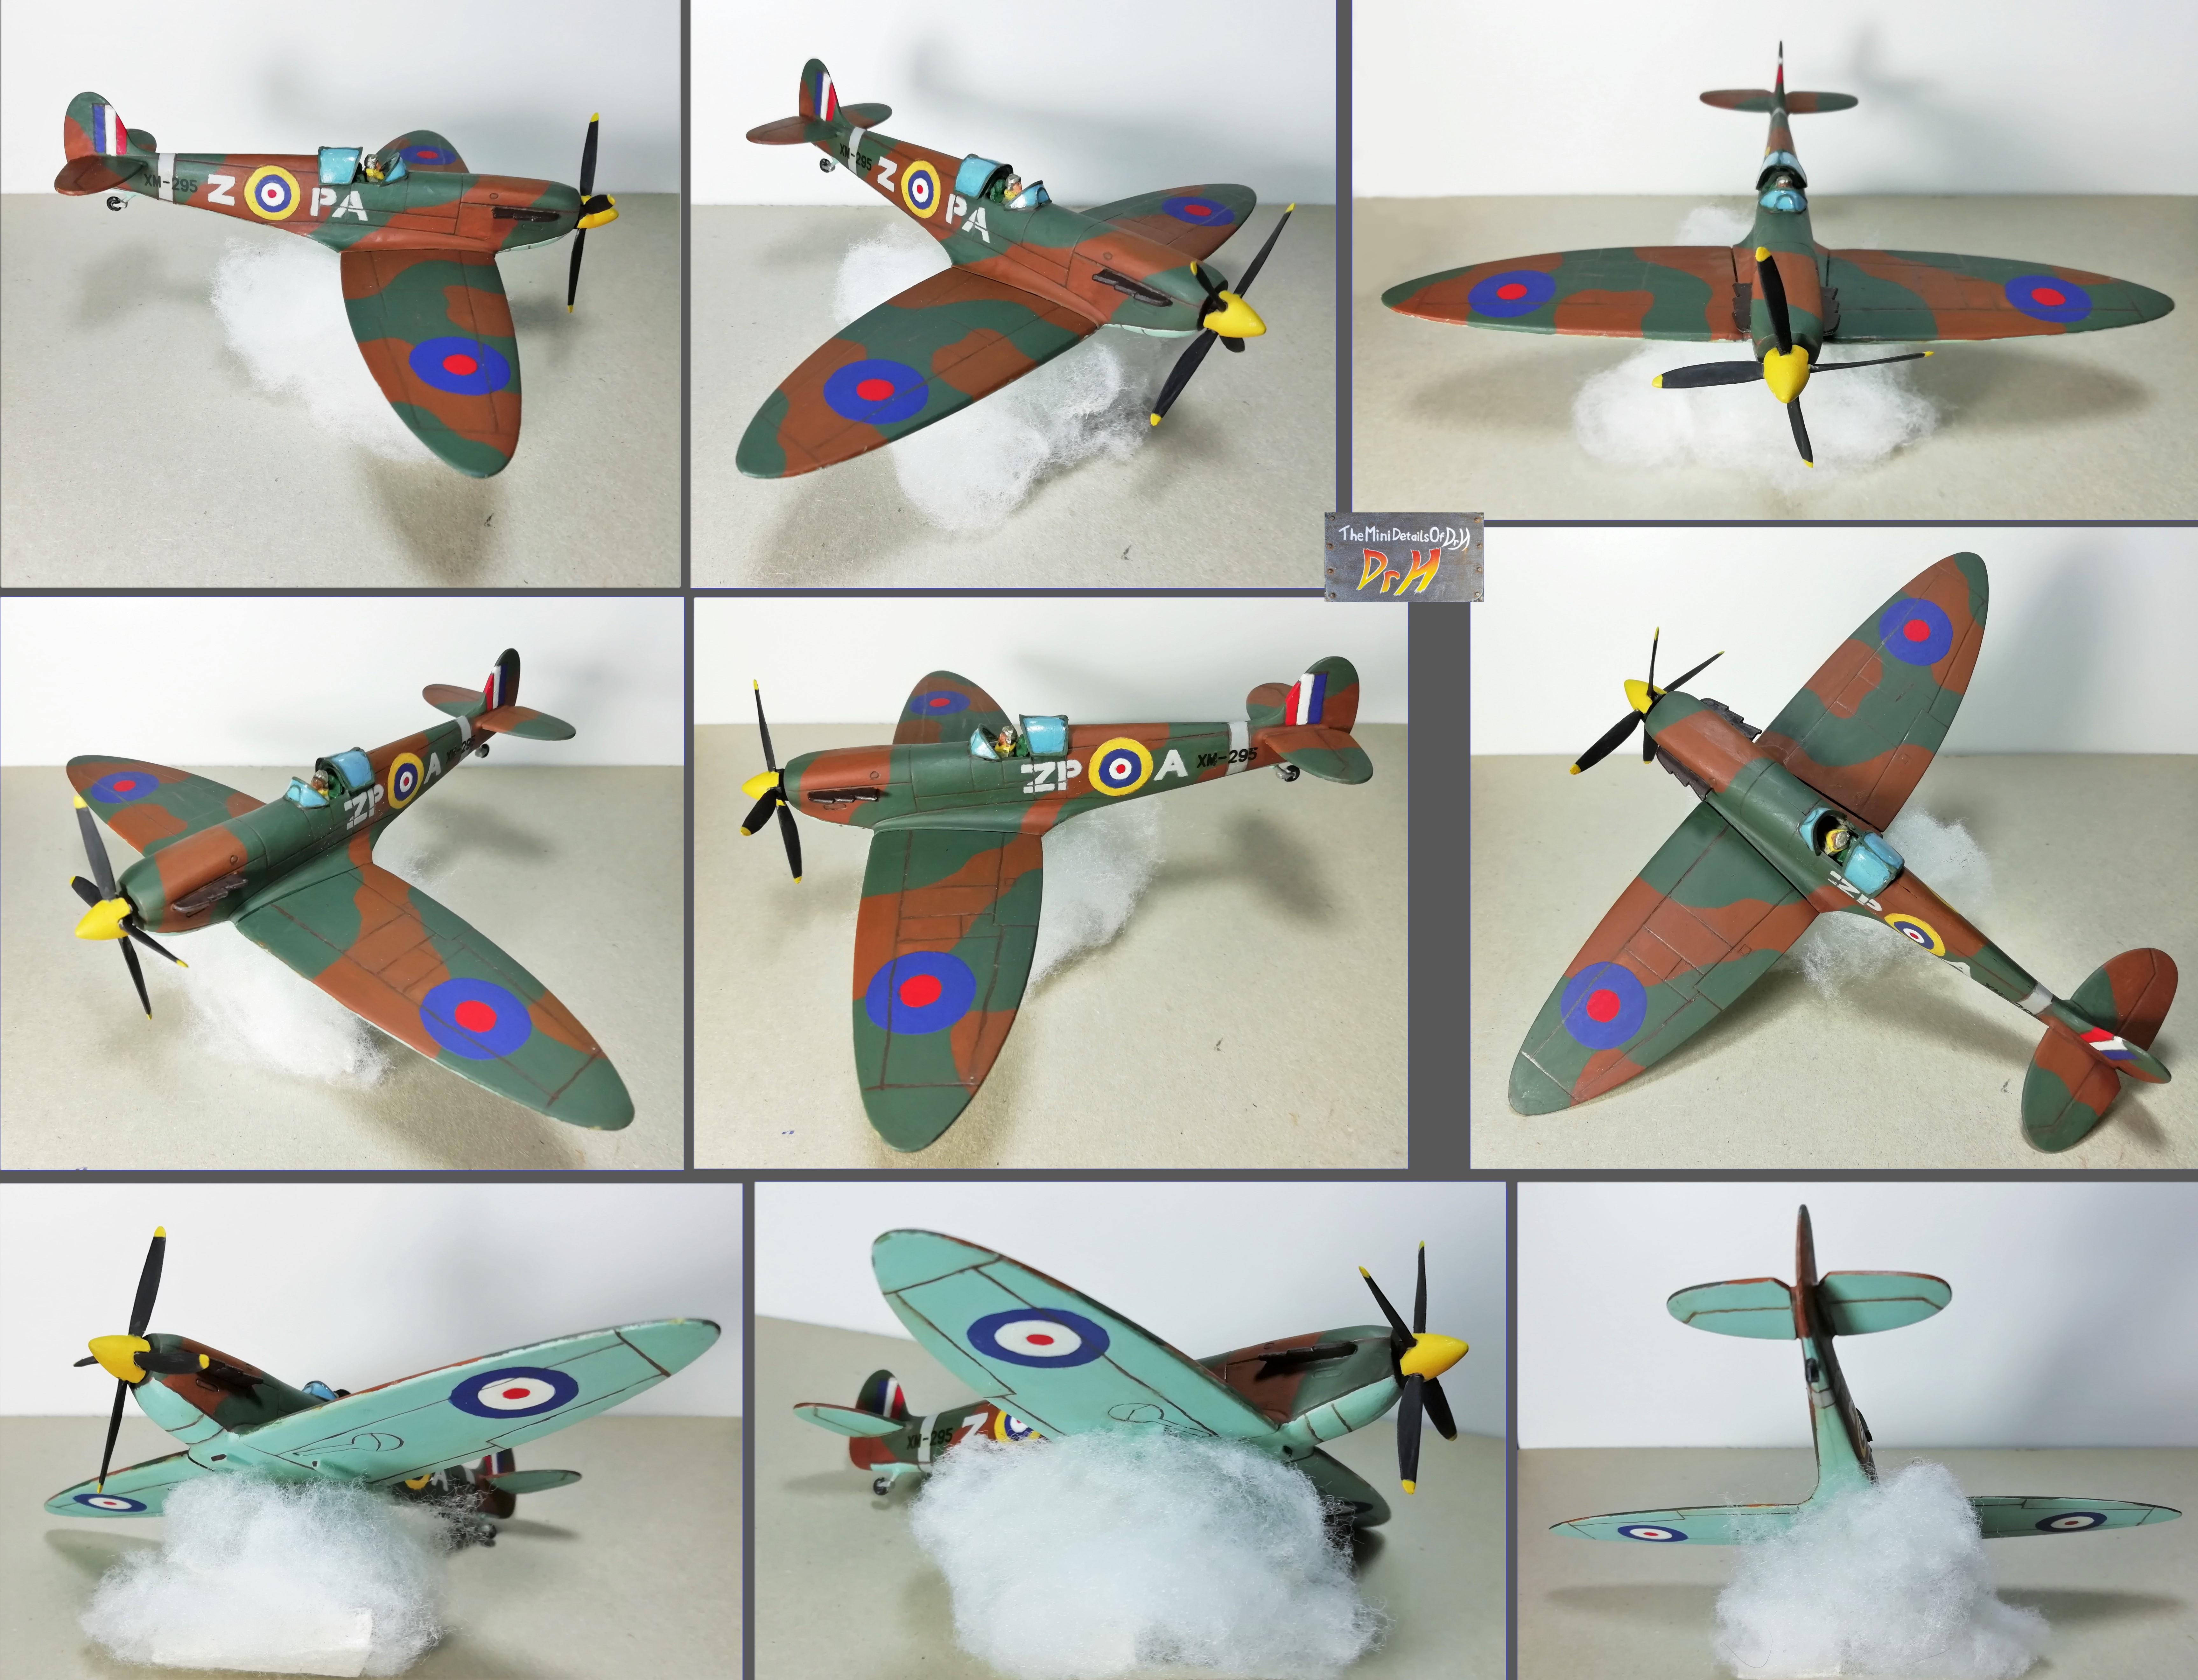 Spitfire repaired and repainted